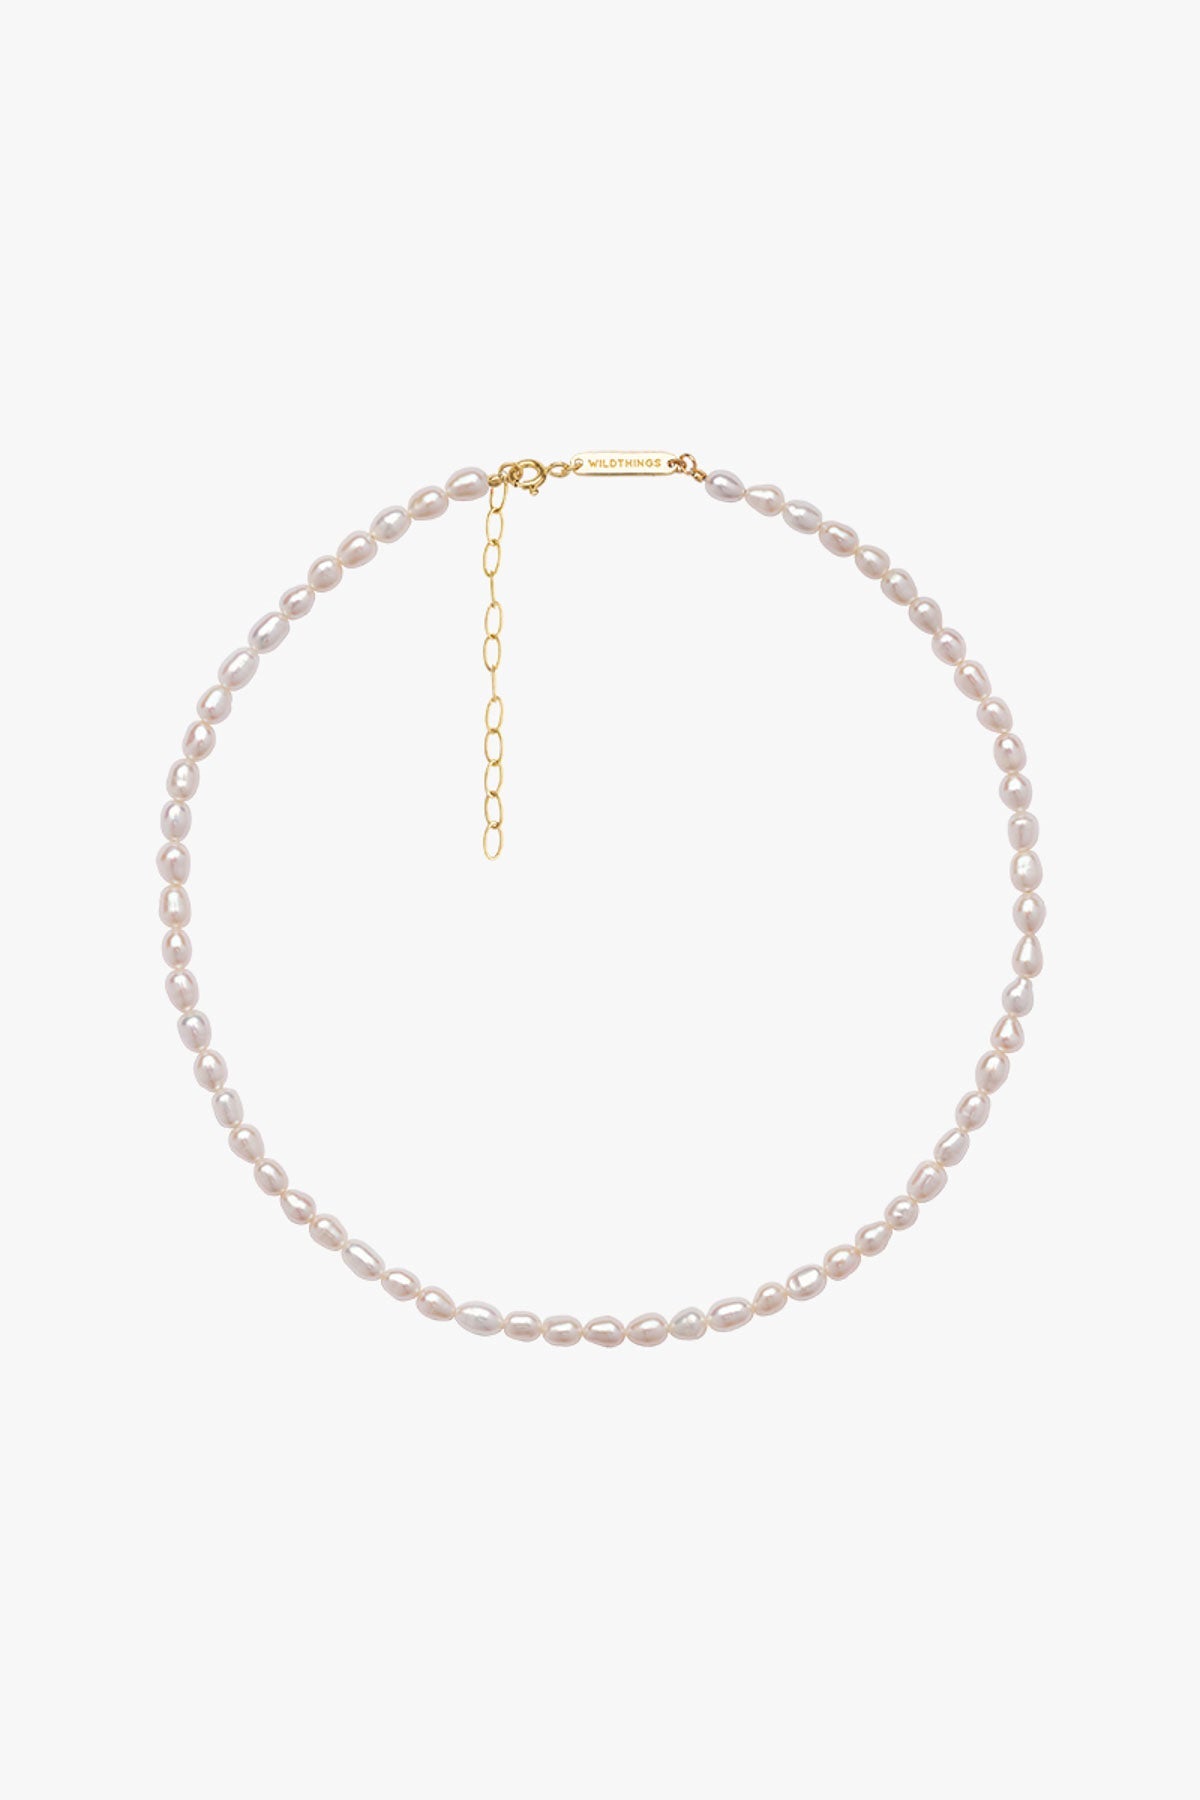 WILDTHINGS - Pearl necklace gold plated